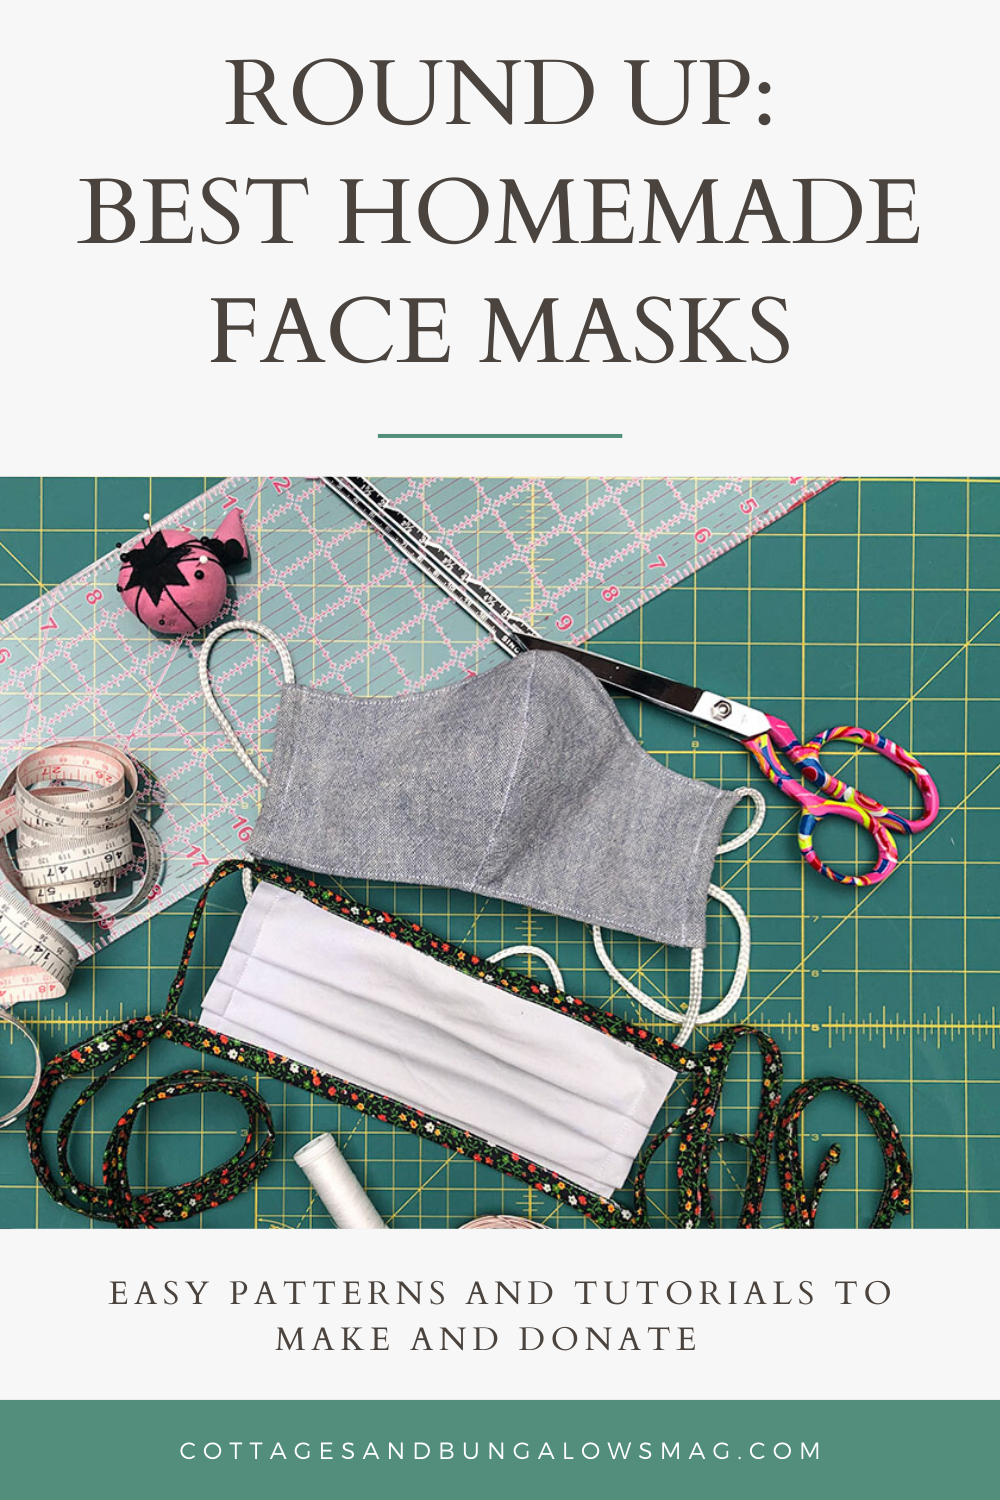 Surgical style face mask by Joann